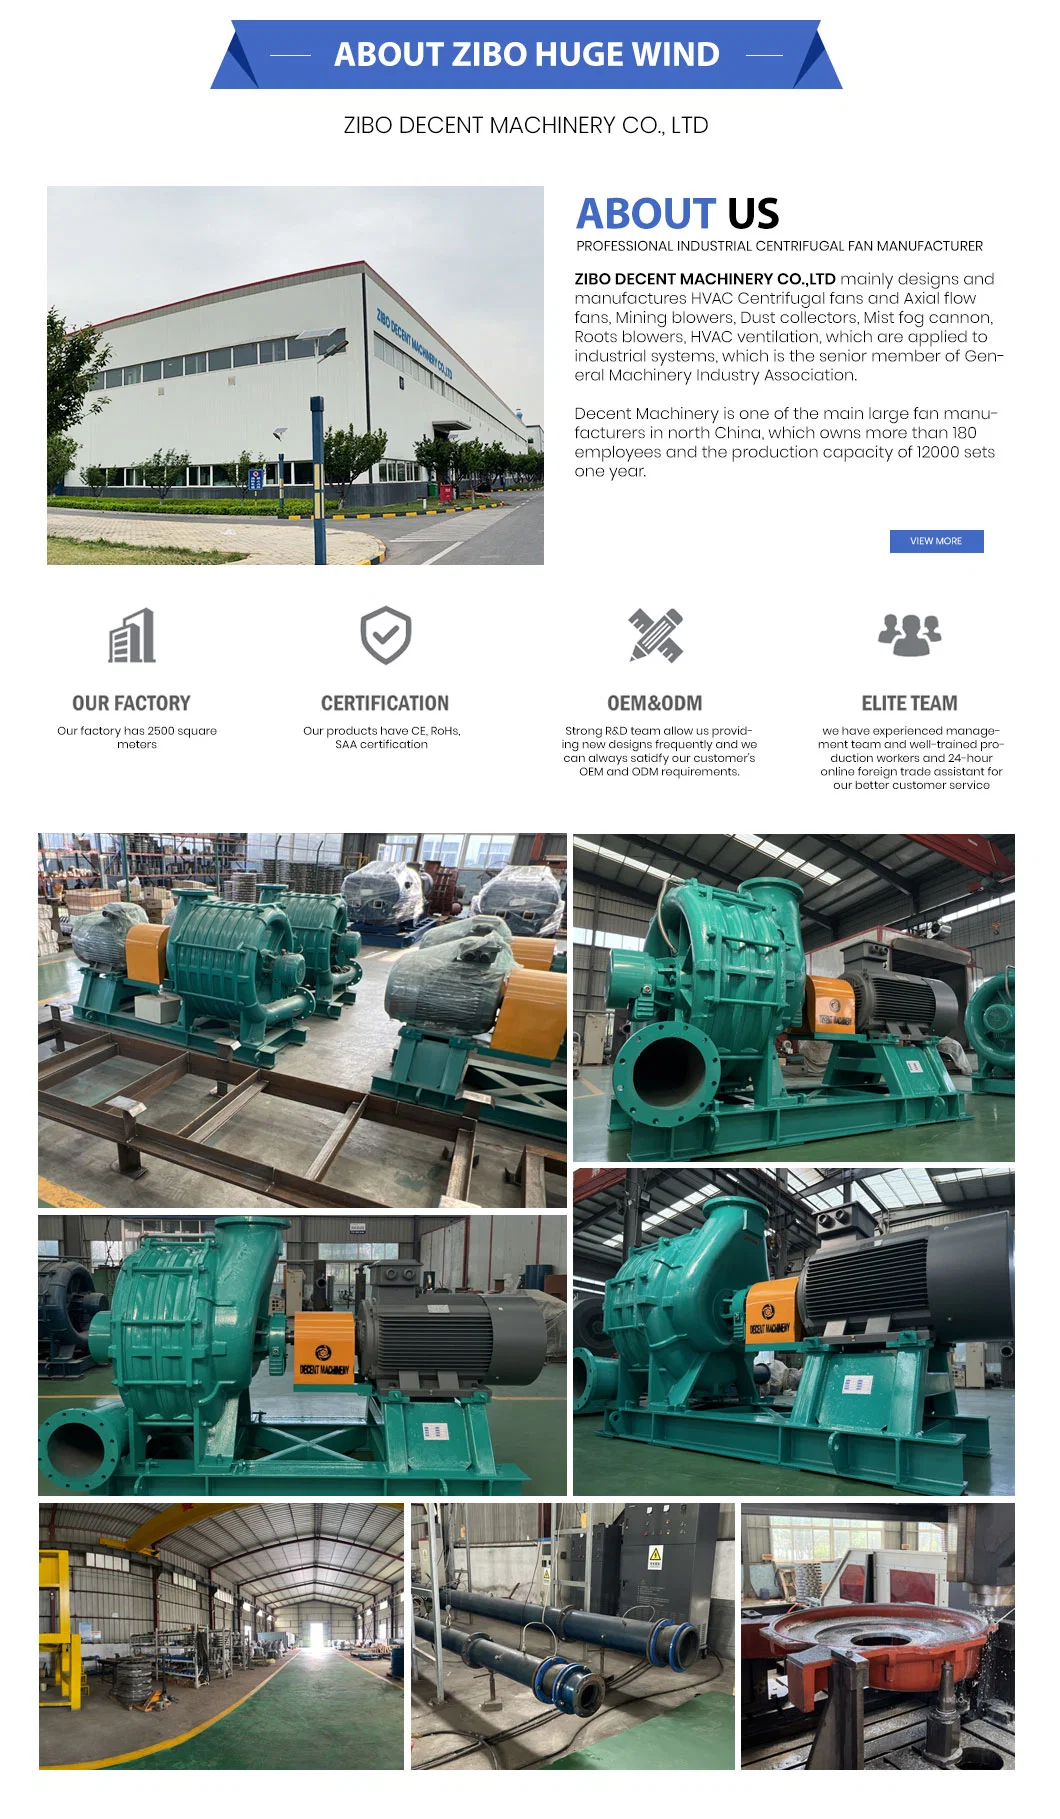 The Multi-Stage Centrifugal Blower-Waste Water Treatment Ecofriendly Type Blower